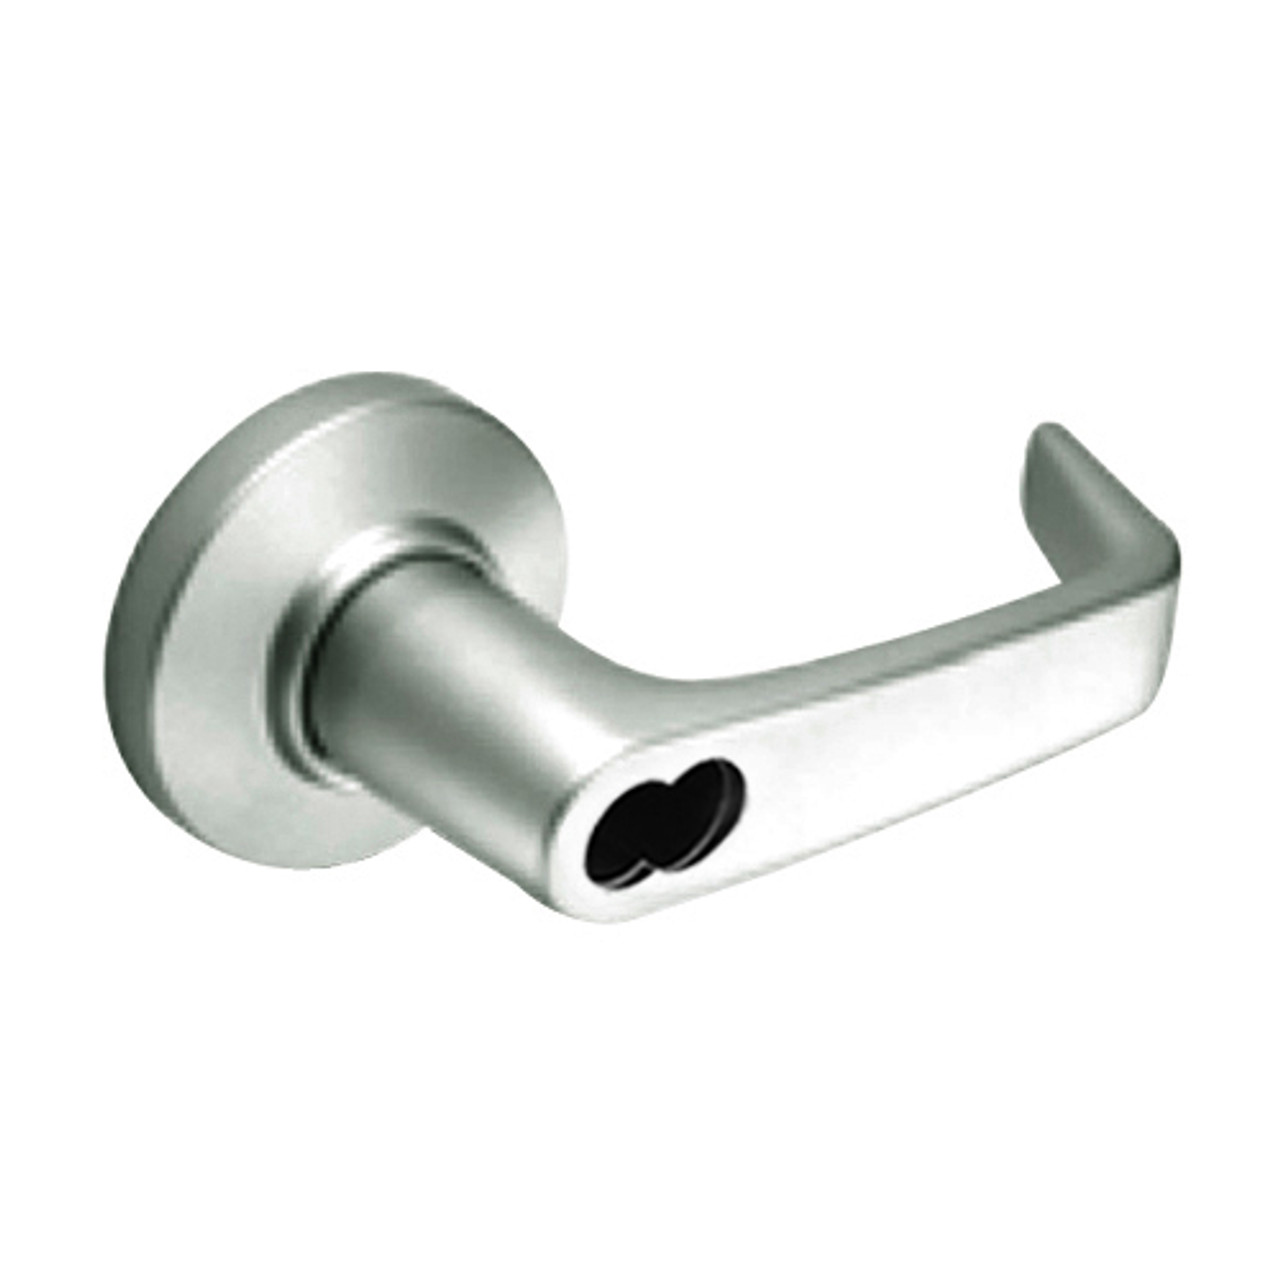 9K37AB15CSTK619 Best 9K Series Entrance Cylindrical Lever Locks with Contour Angle with Return Lever Design Accept 7 Pin Best Core in Satin Nickel